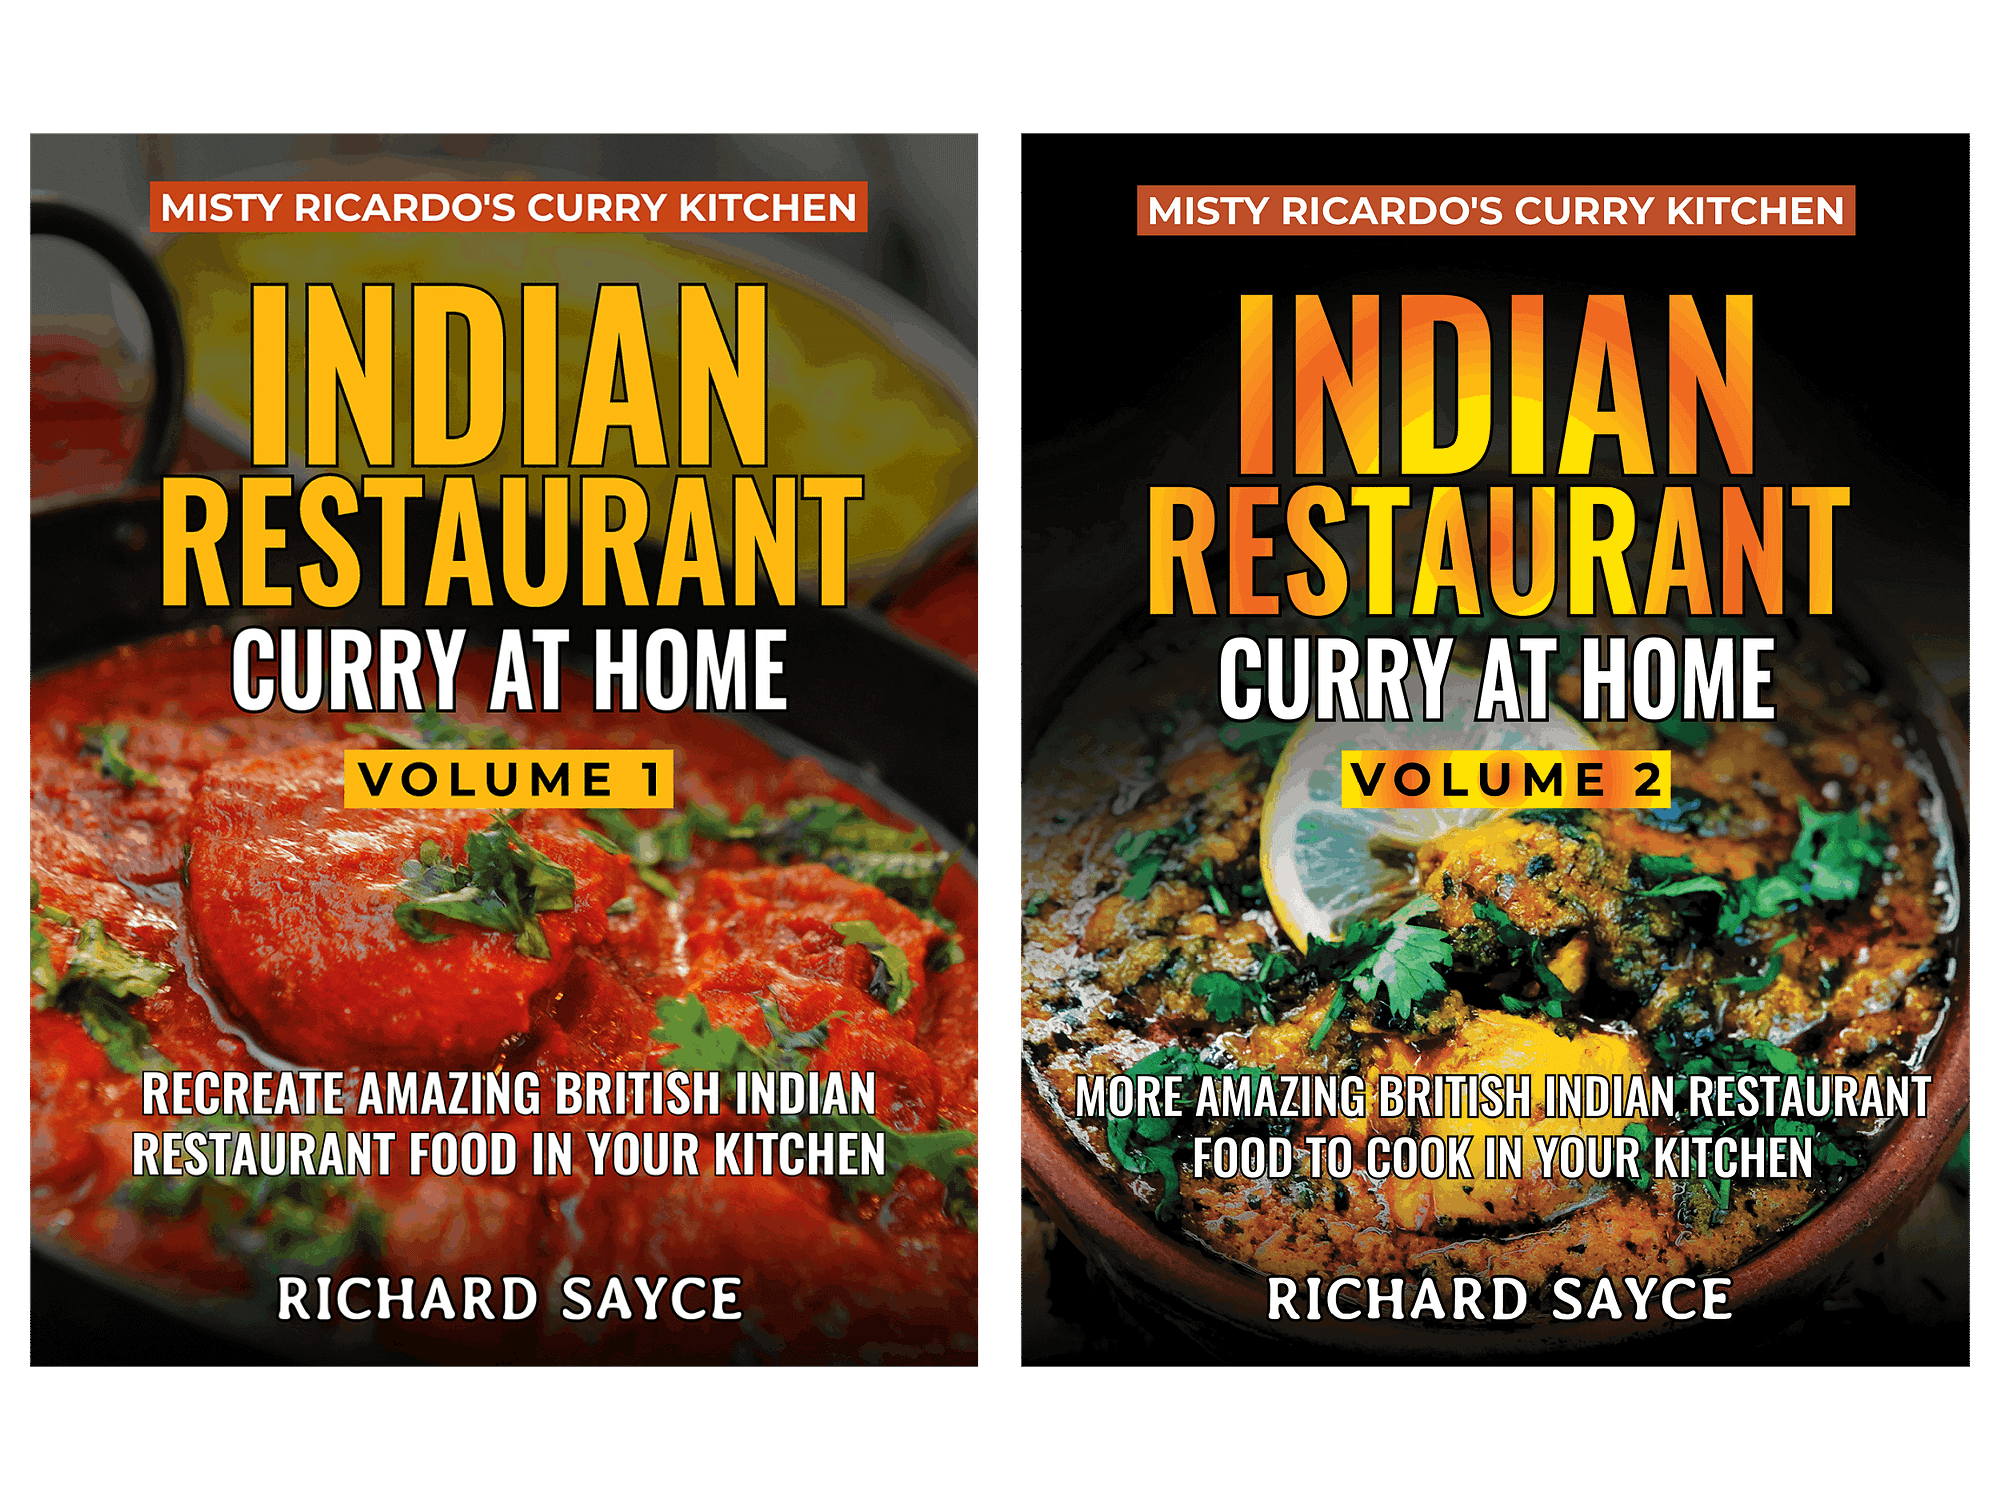 Indian Restaurant Curry at Home Volumes 1 & 2